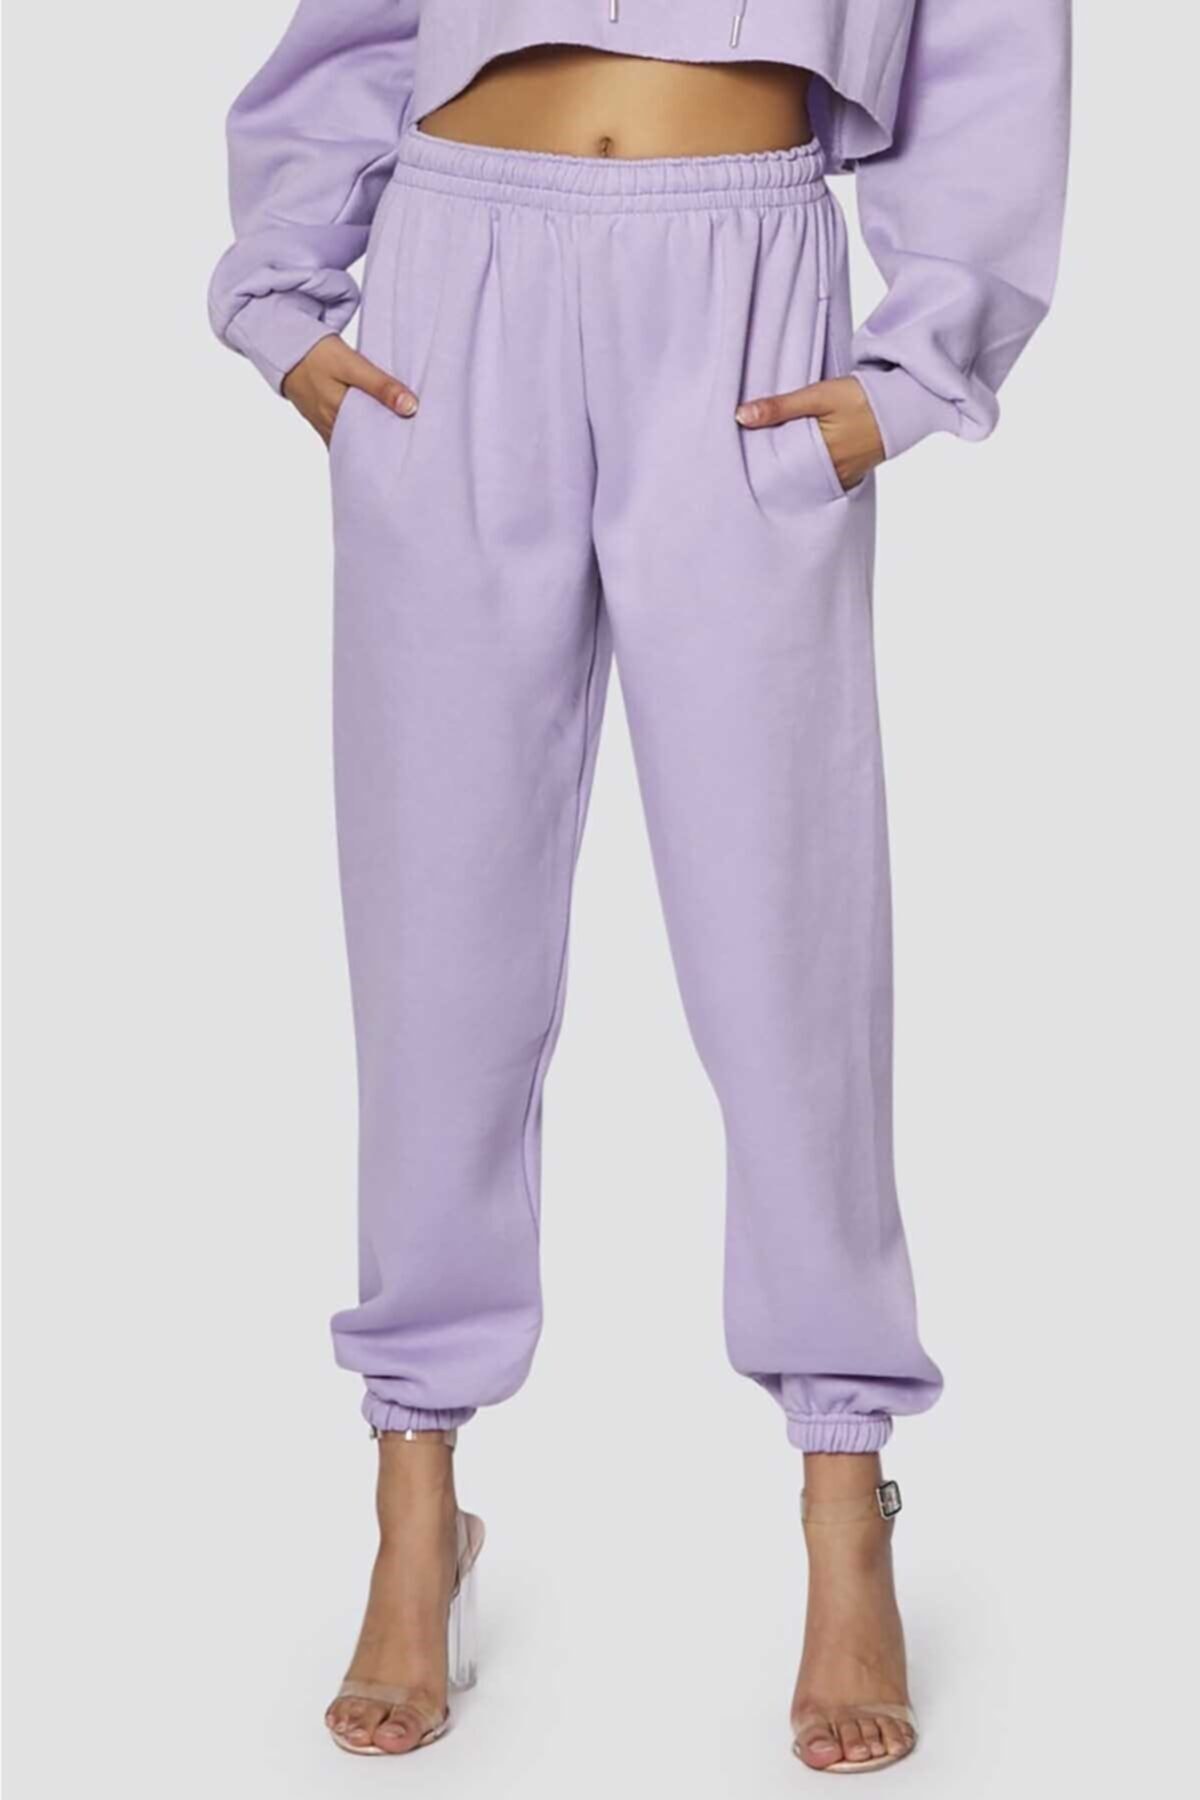 Madmext Mad Girls Lilac Basic Women's Tracksuit Mg771